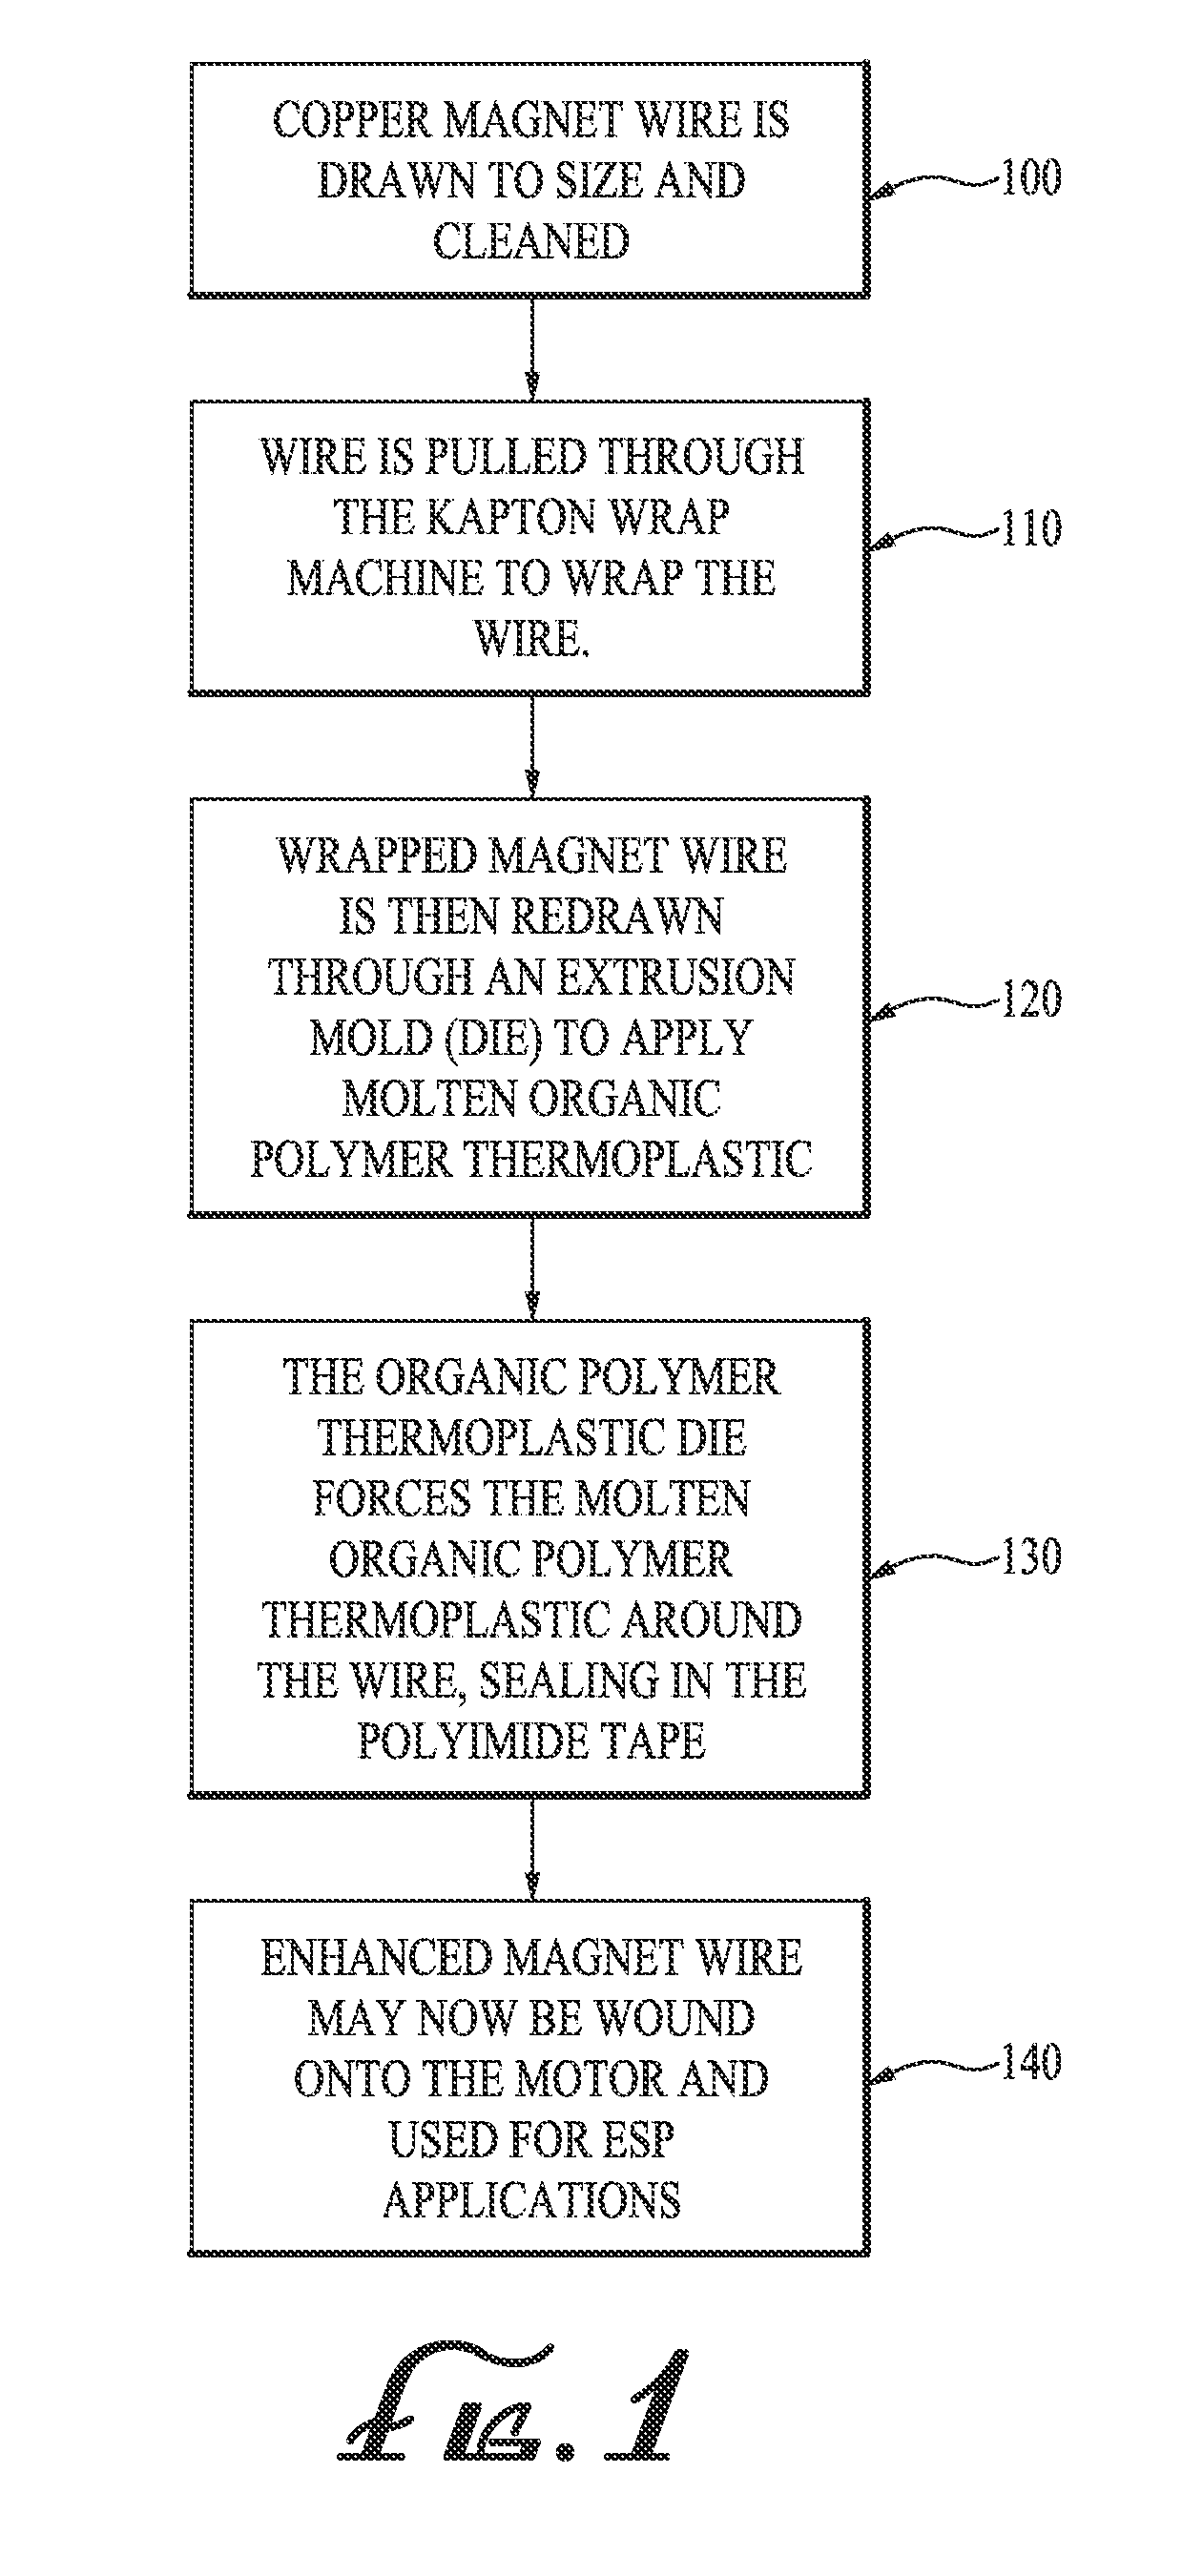 System and method for enhanced magnet wire insulation